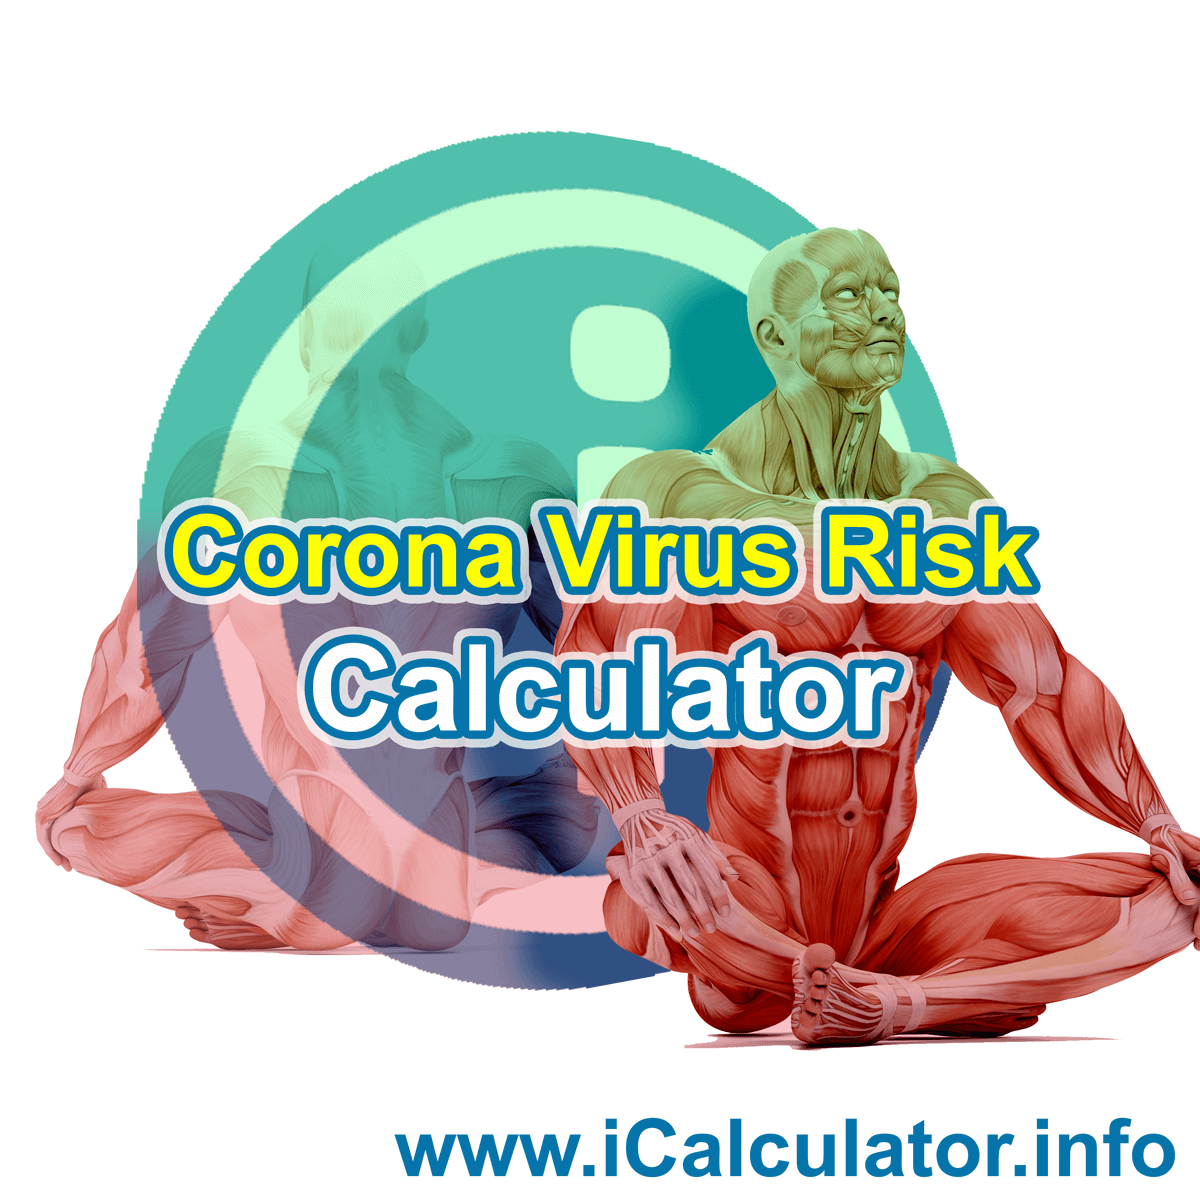 Coronavirus Risk Calculator. This image shows a gauge of Coronavirus risk to life based on a scaled approach where red indicates the highest risk to life caused by Coronavirus and green indicates the lowest risk to life when contracting Coronavirus.